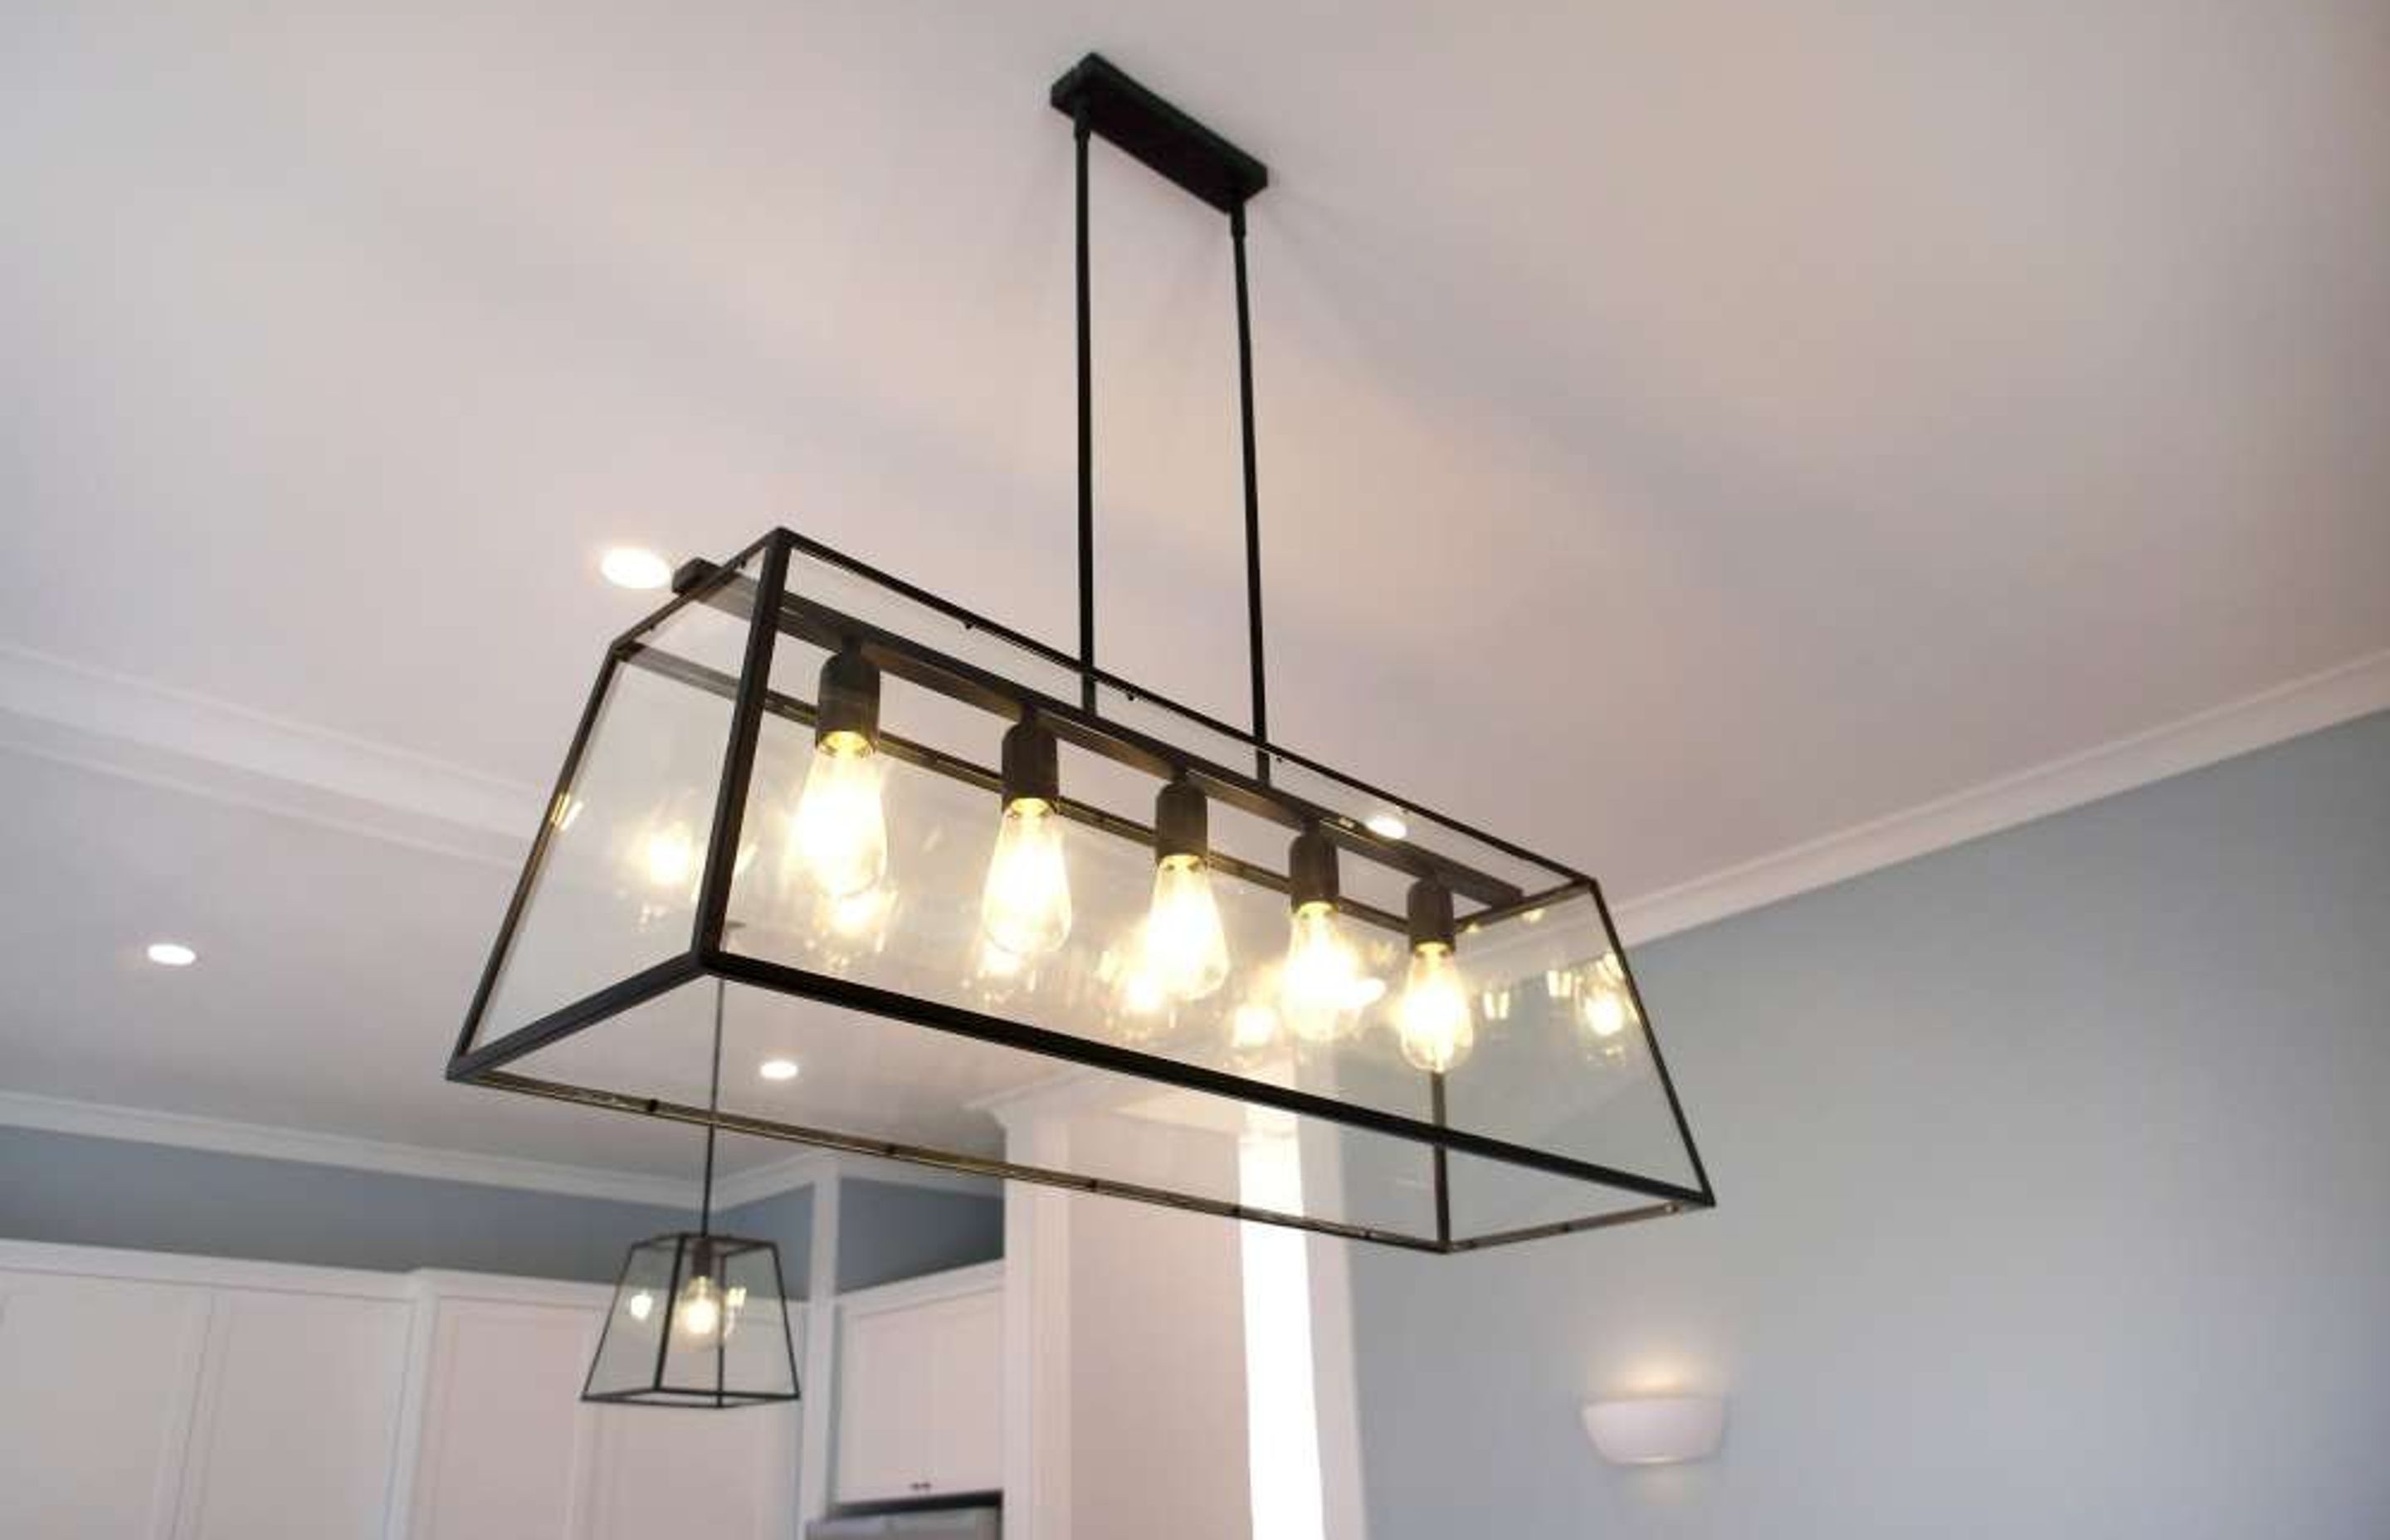 This long multi-bulb pendant light was installed above the dining table